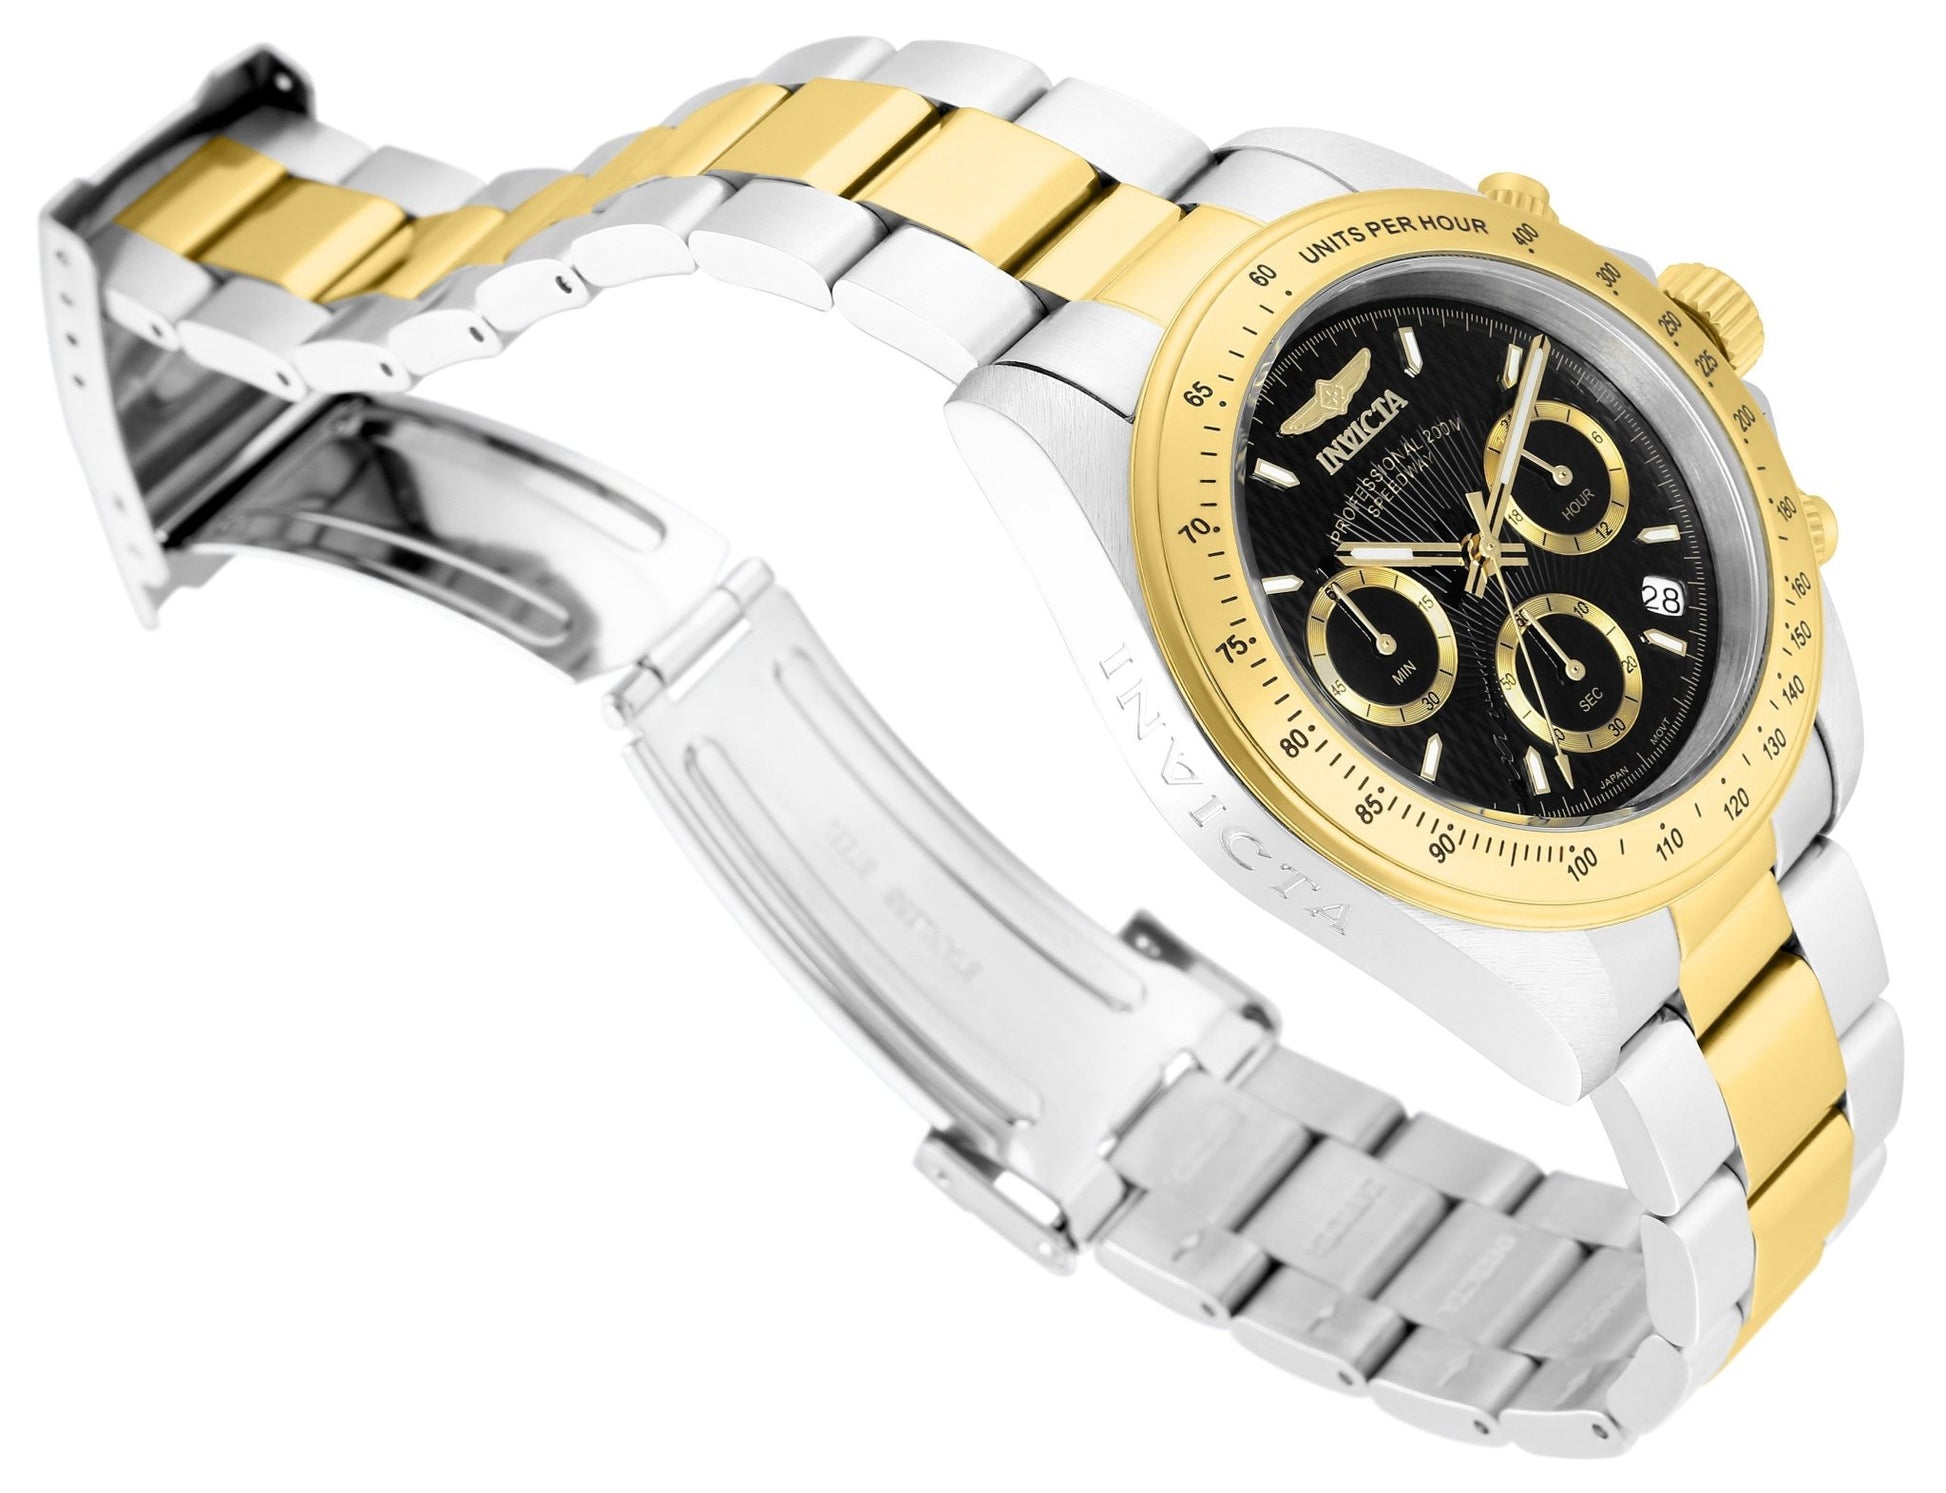 Invicta Speedway 9224 chronograph watch with two-tone stainless steel band, side angle view